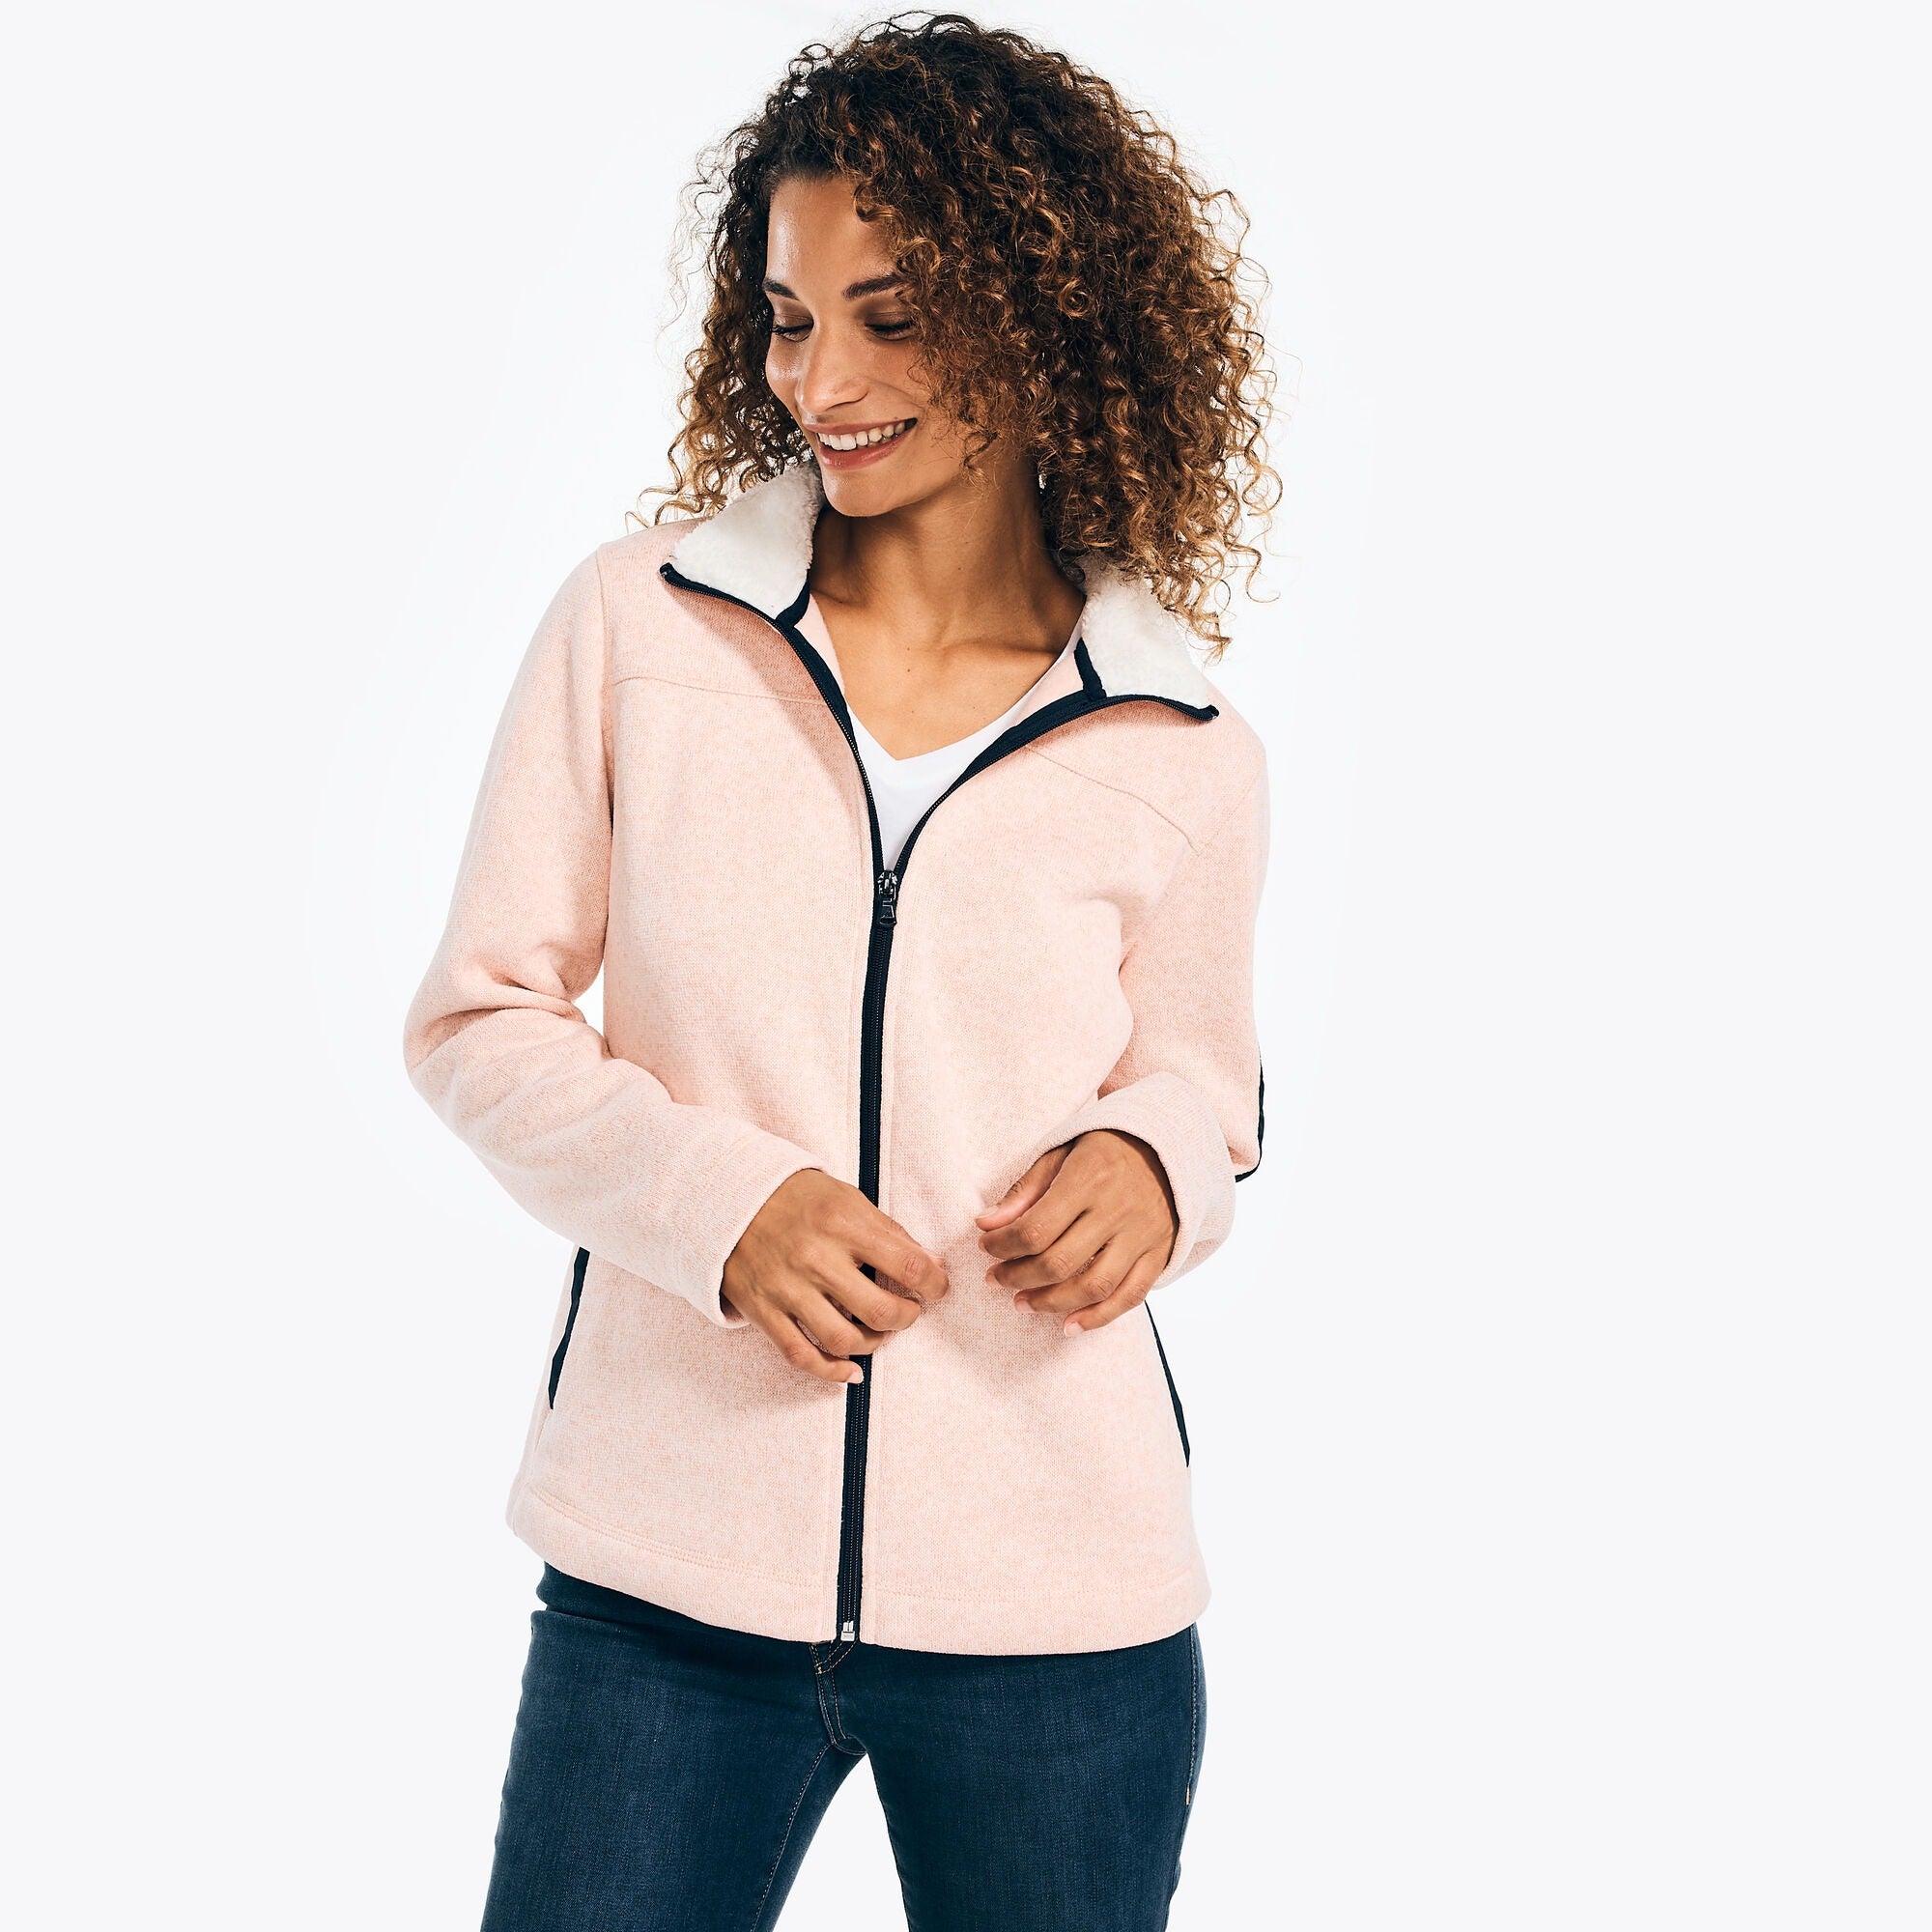 model wearing pink jacket with black trim and white fleece lining on the mock neck